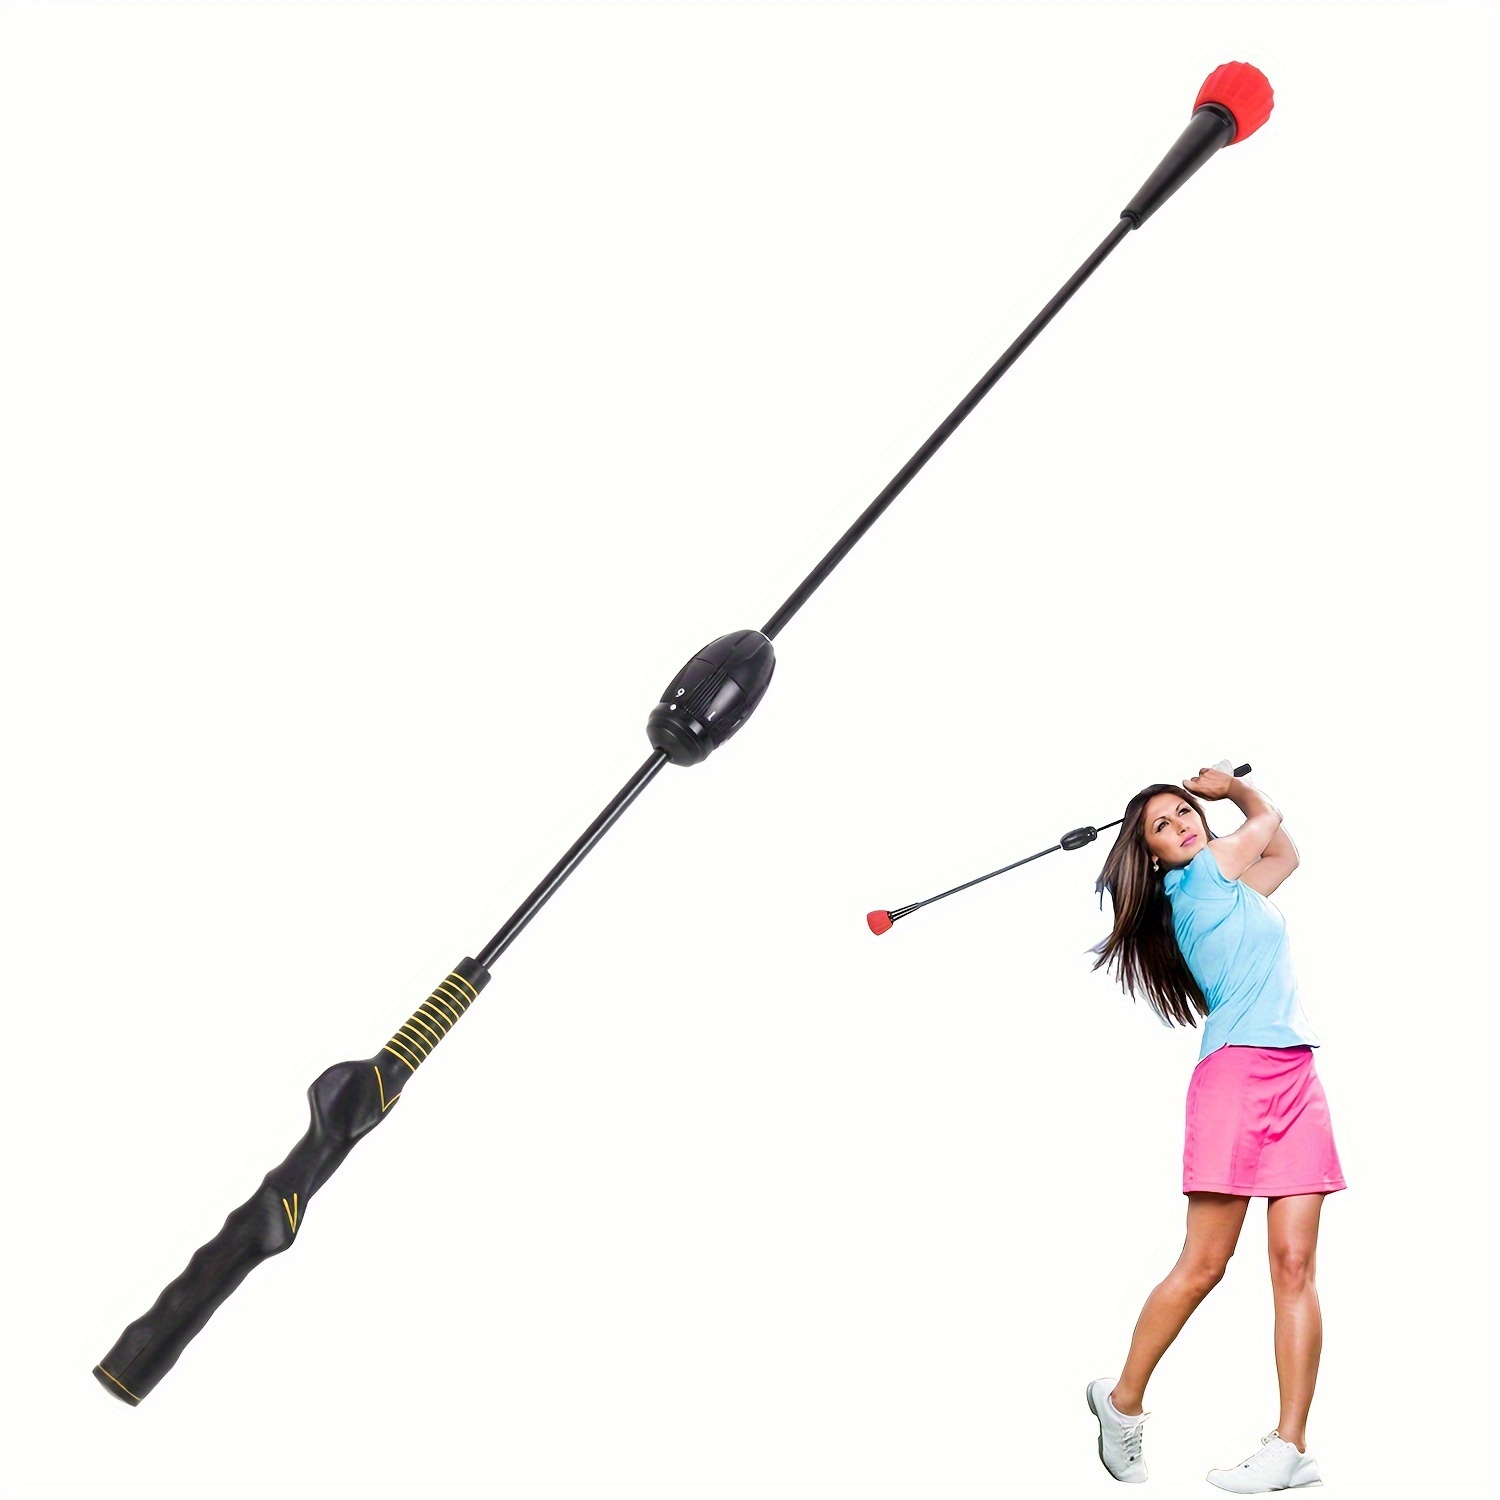 

Power Stick Golf Distance Training Aid Increase Swing Speed And Develop Lag For More Power To Hit Every Club Further